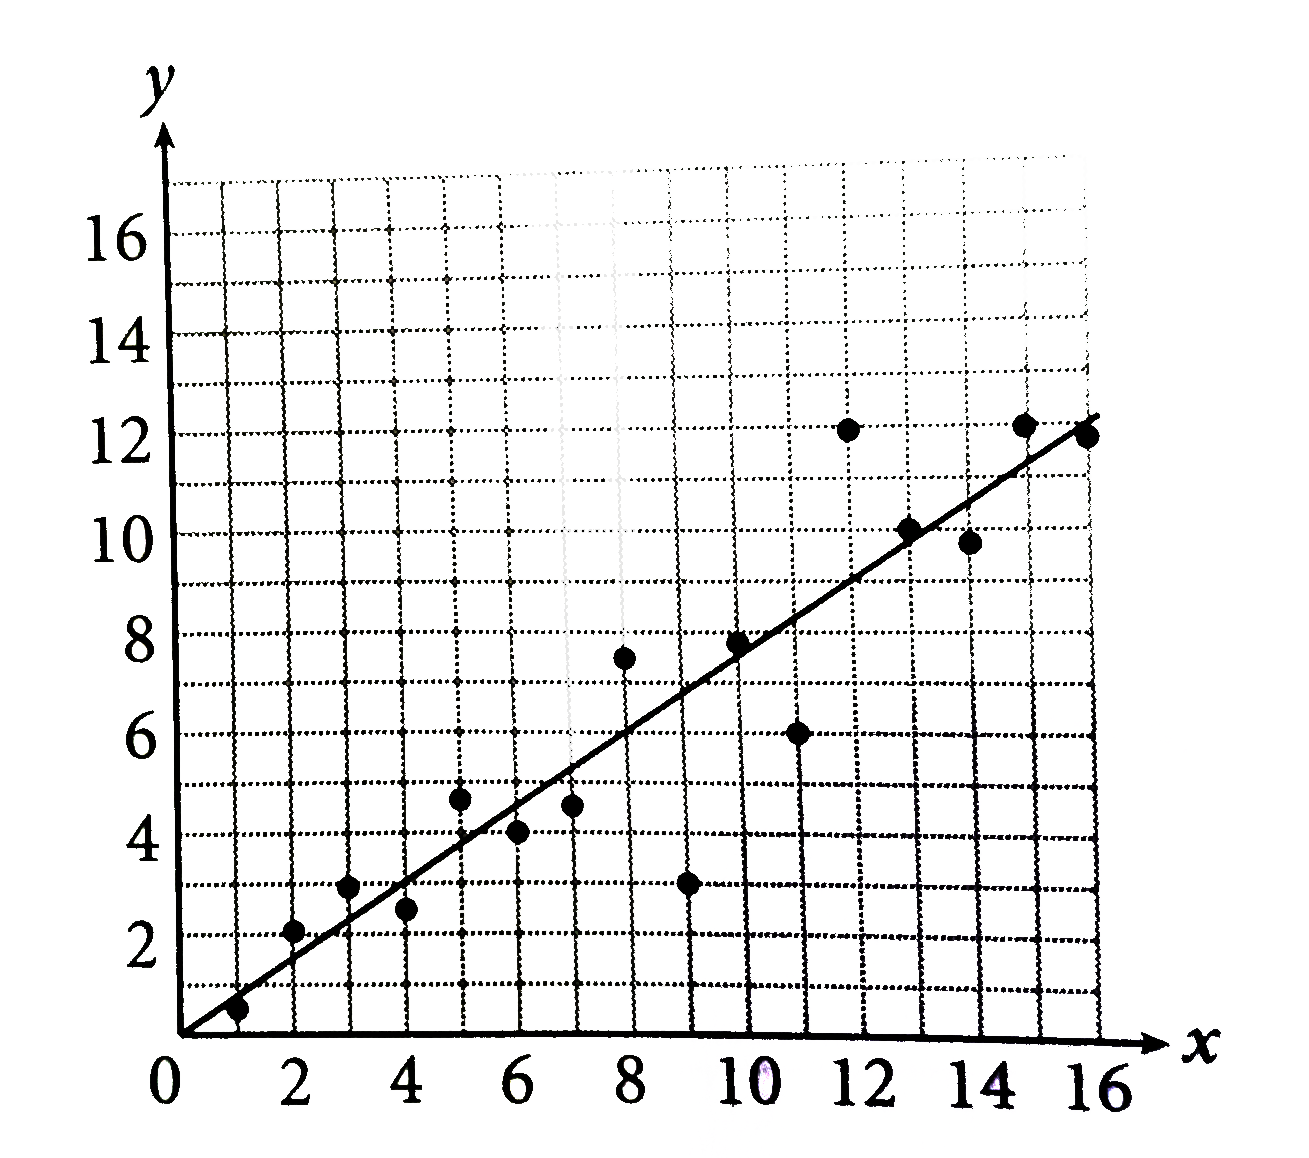 By what percent does the y-coordinate of the data point (12,12) deviate from the y-value predicted by the line of best fit for an x-valued of 12? (Ignore the percent sign and grid your response to the nearest percent.)